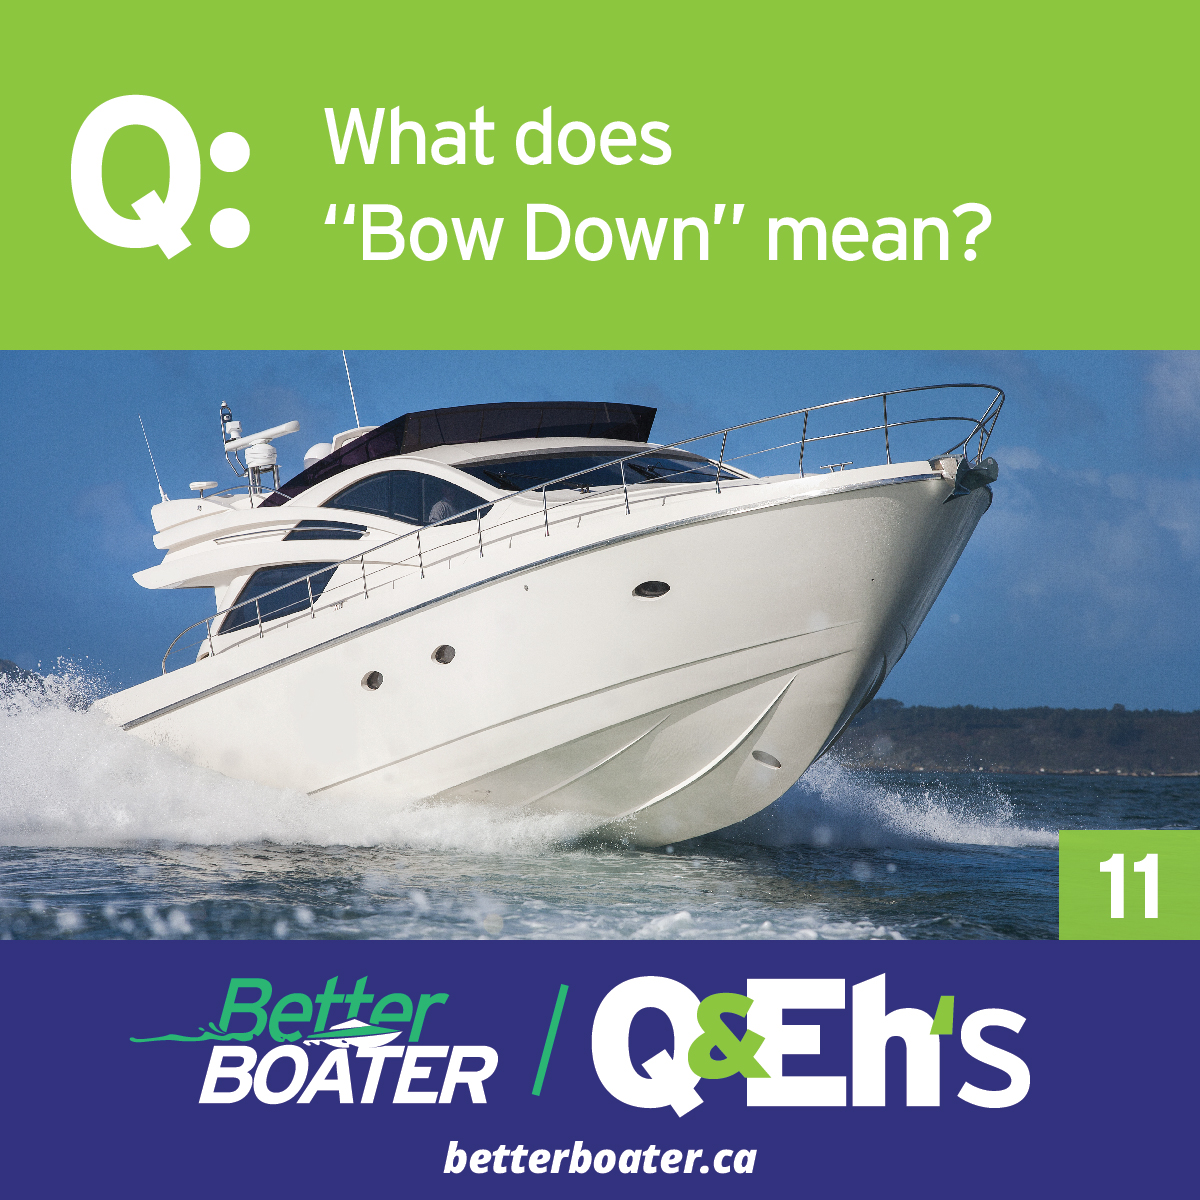 https://betterboater.ca/Bow%20Down